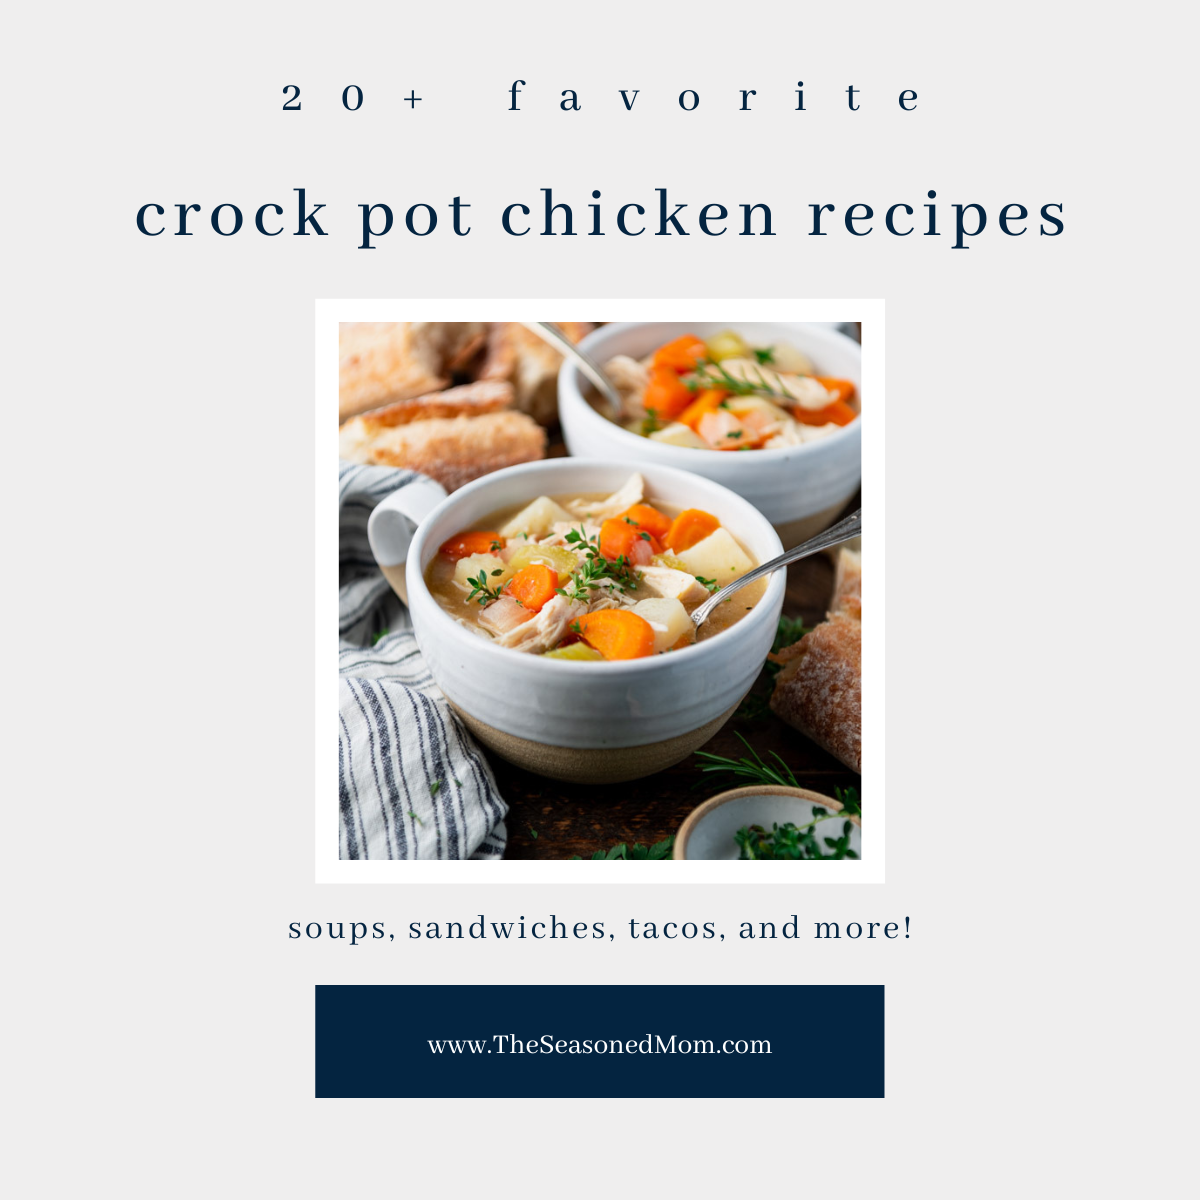 Slow Cooker Archives - Page 5 of 13 - The Seasoned Mom